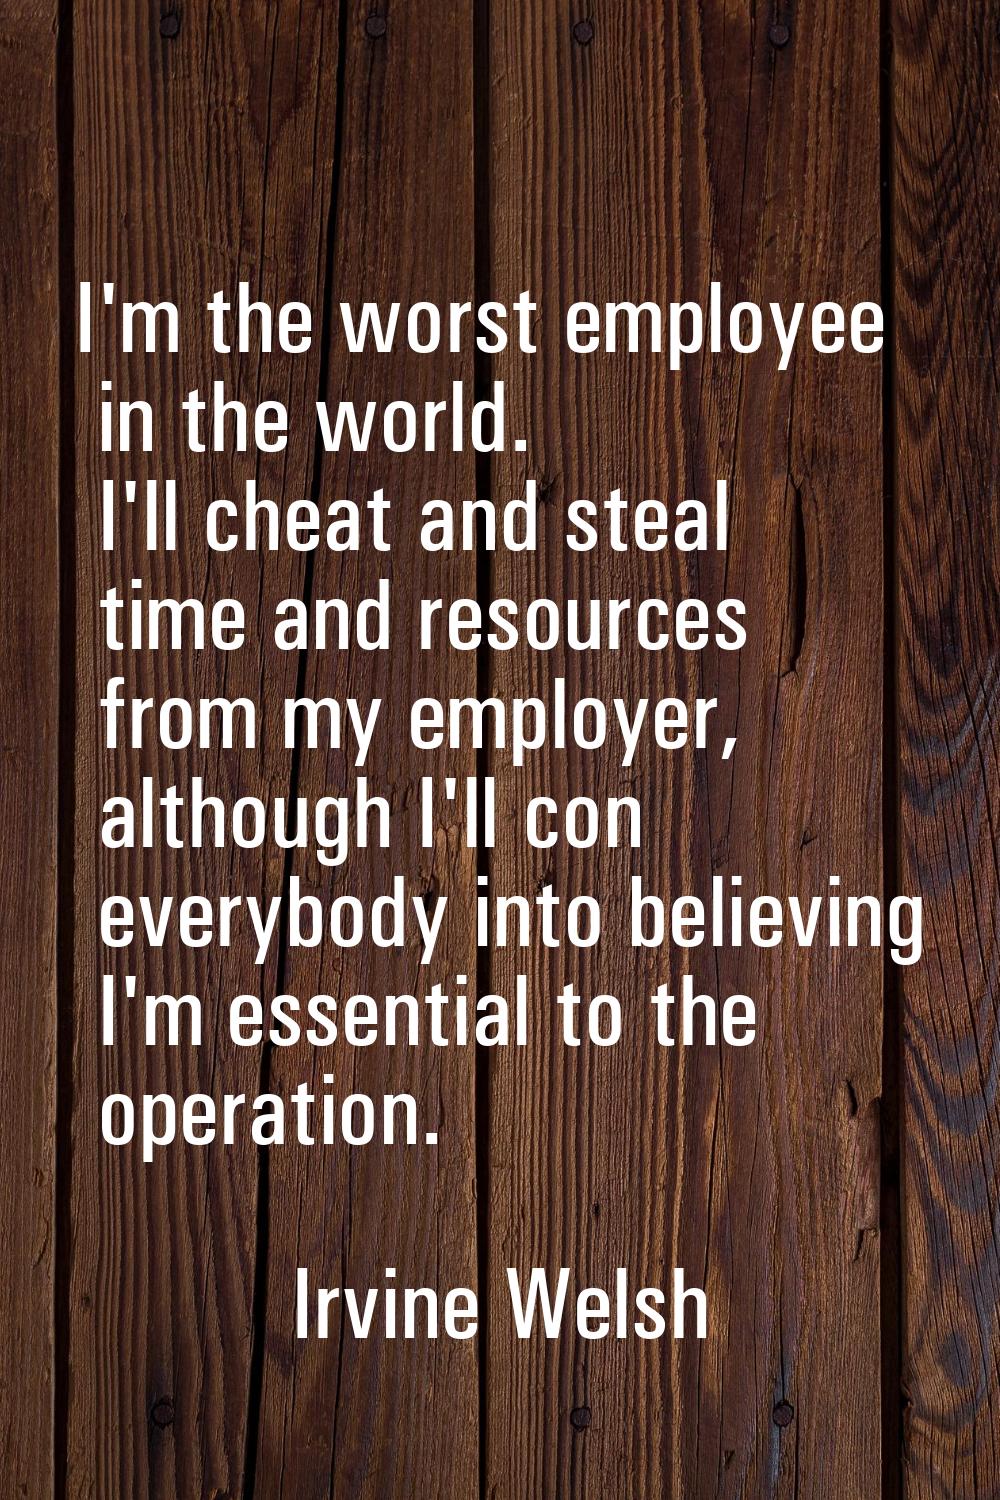 I'm the worst employee in the world. I'll cheat and steal time and resources from my employer, alth